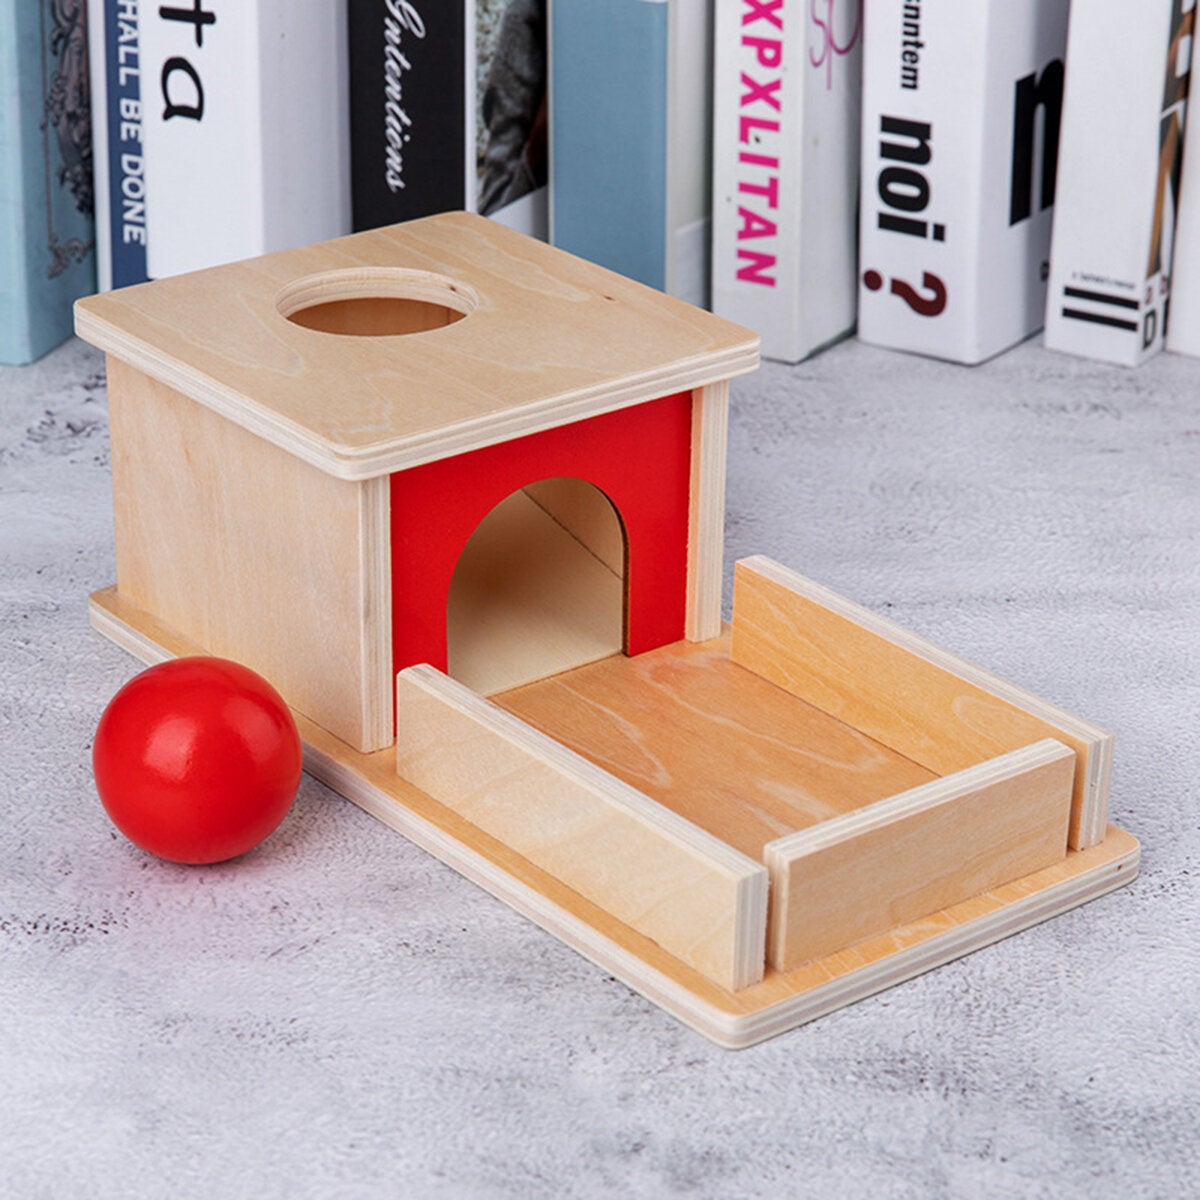 Montessori Object Permanence Box Wooden Permanent Box Practical Learning Educational Toy for Kids Gift